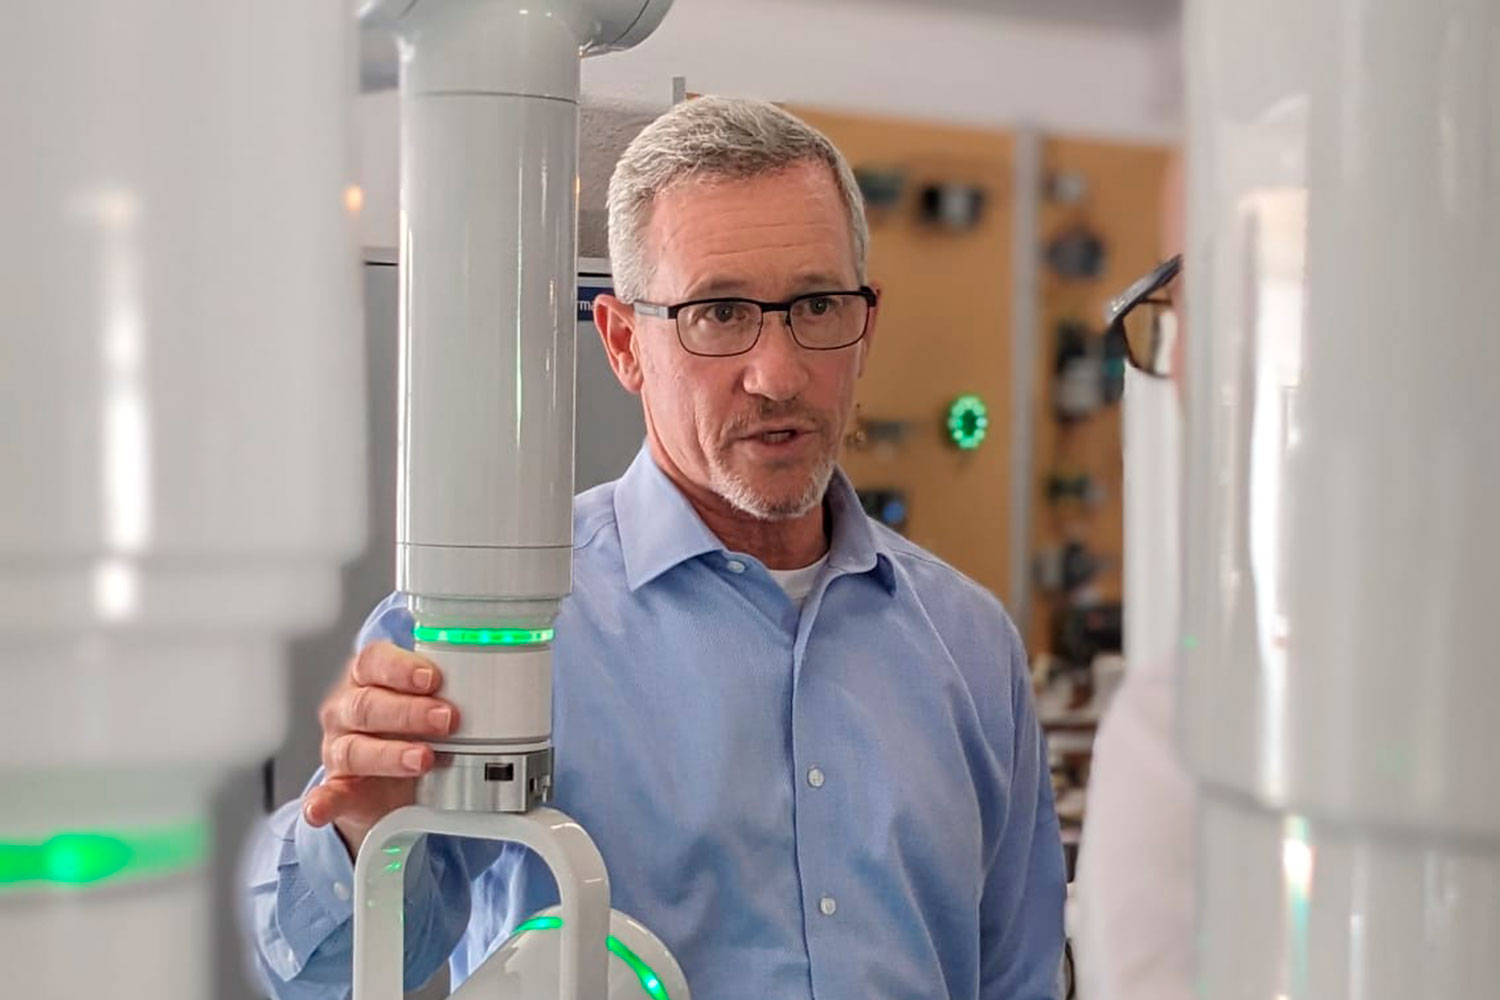 Todd Usen with bitrack surgical robot